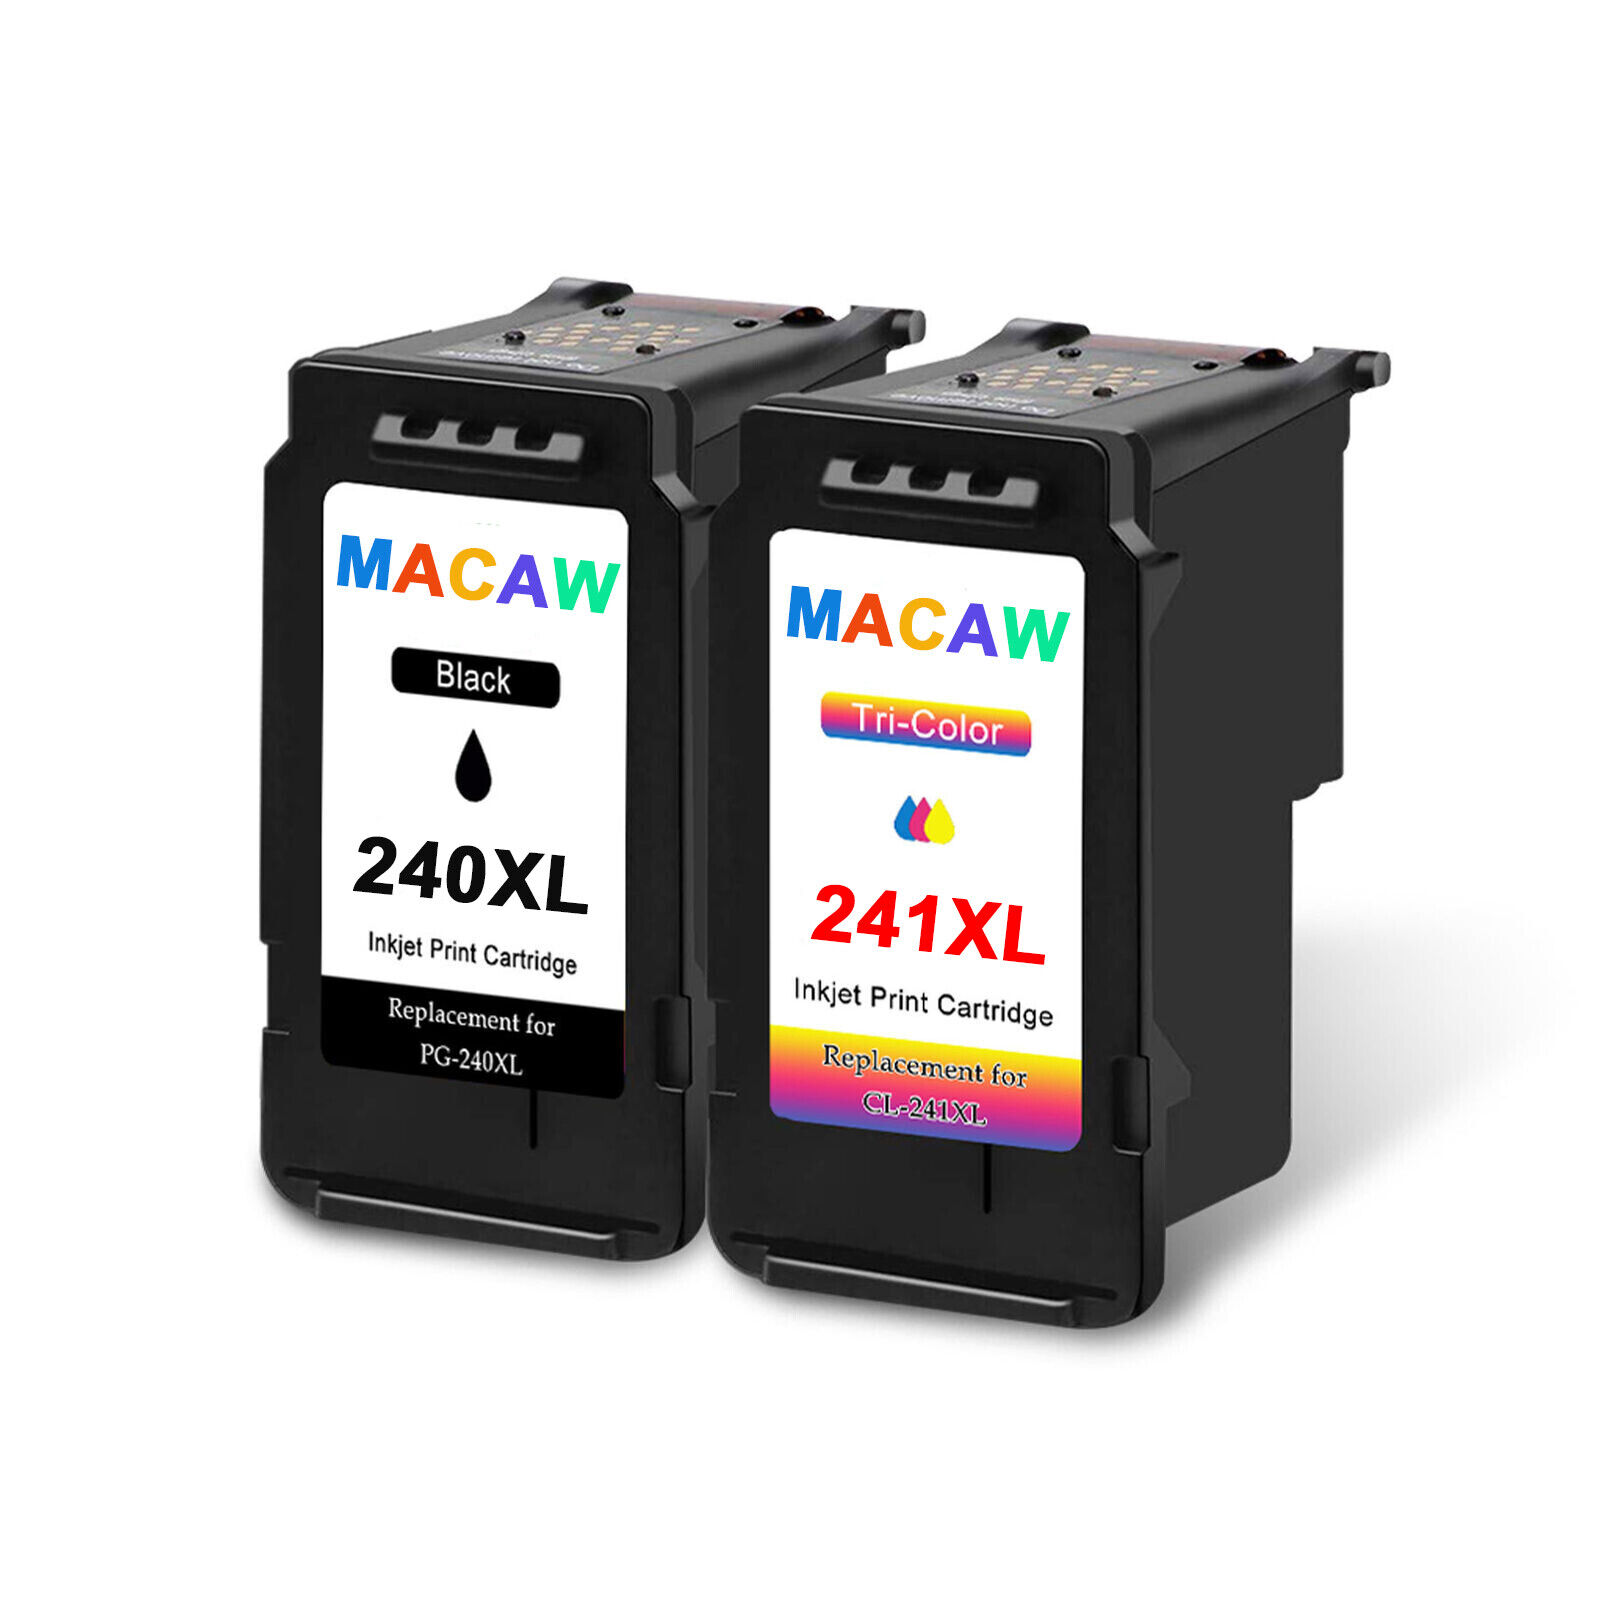 Ink Cartridge for Canon PG240XL CL241XL fits PIXMA MG2120 MG2220 MG3120